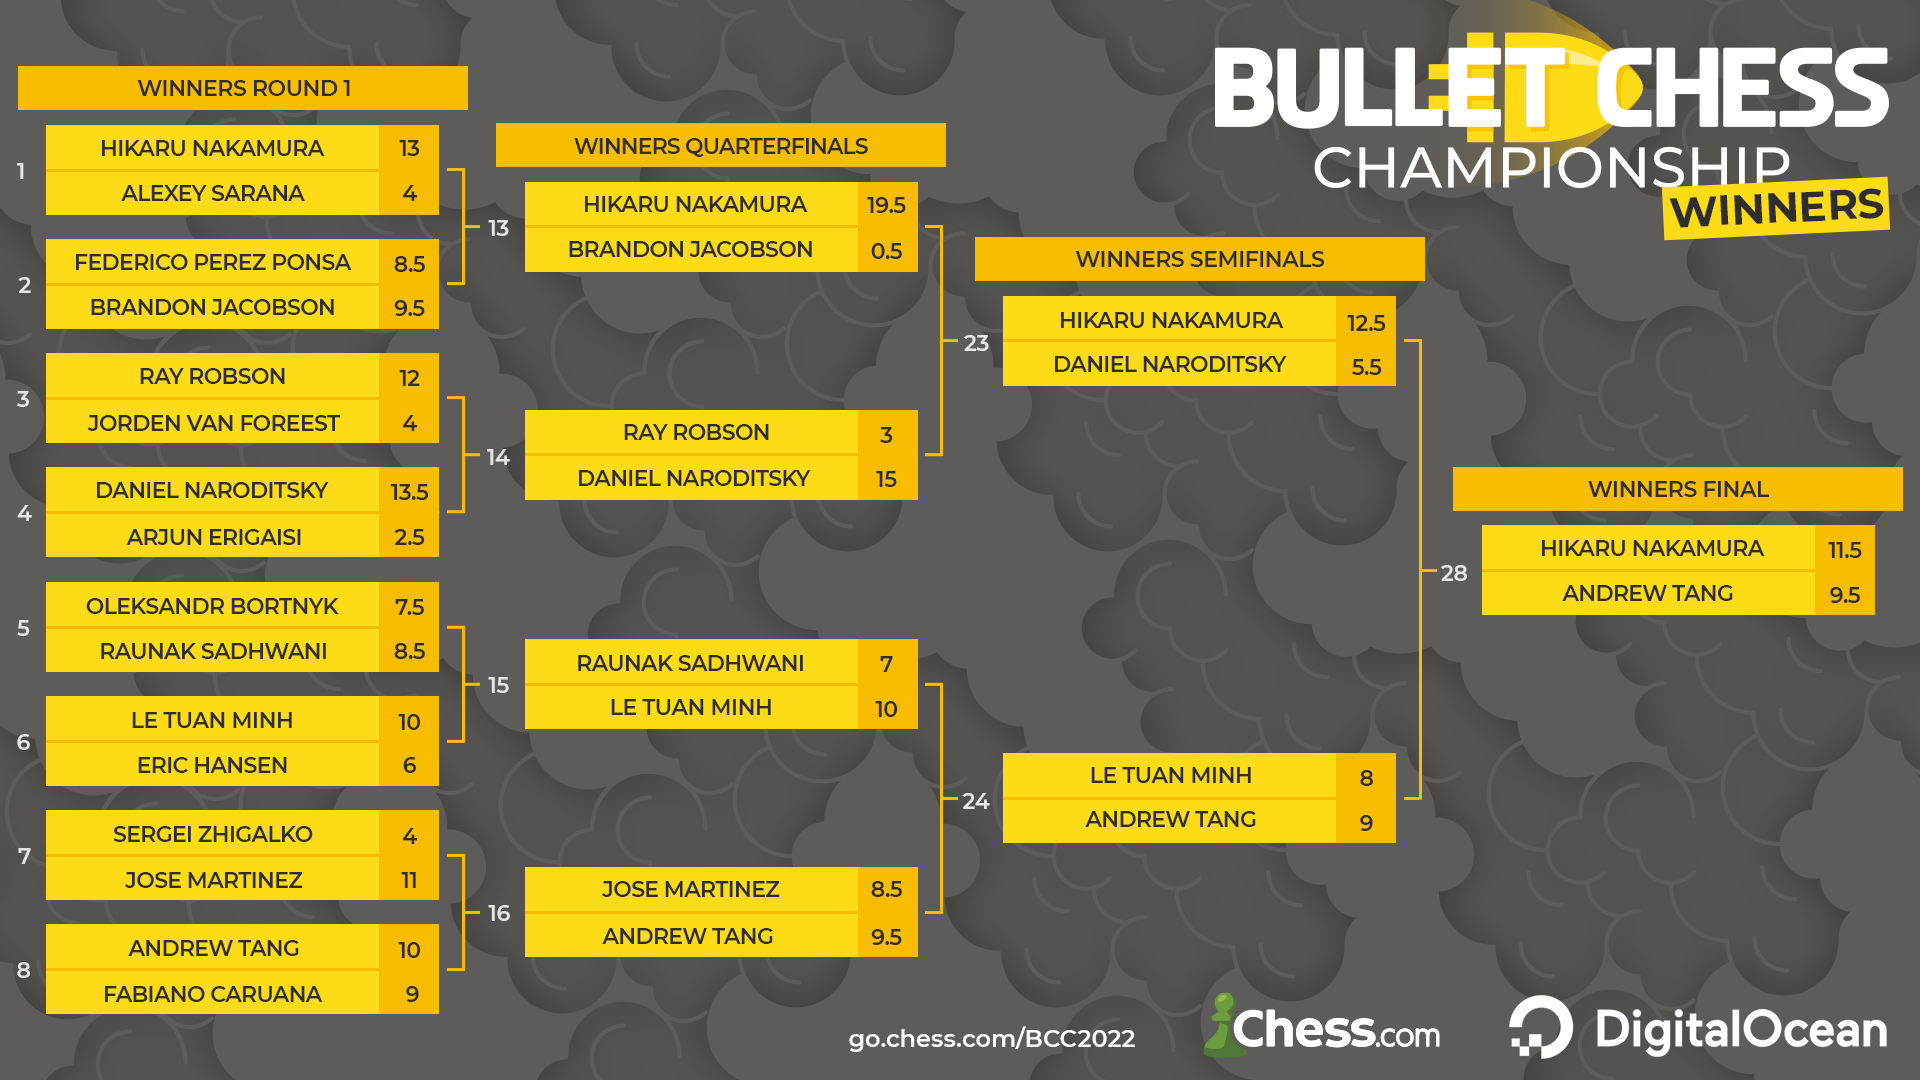 Final Standings of the 2023 Bullet Chess Championship : r/chess